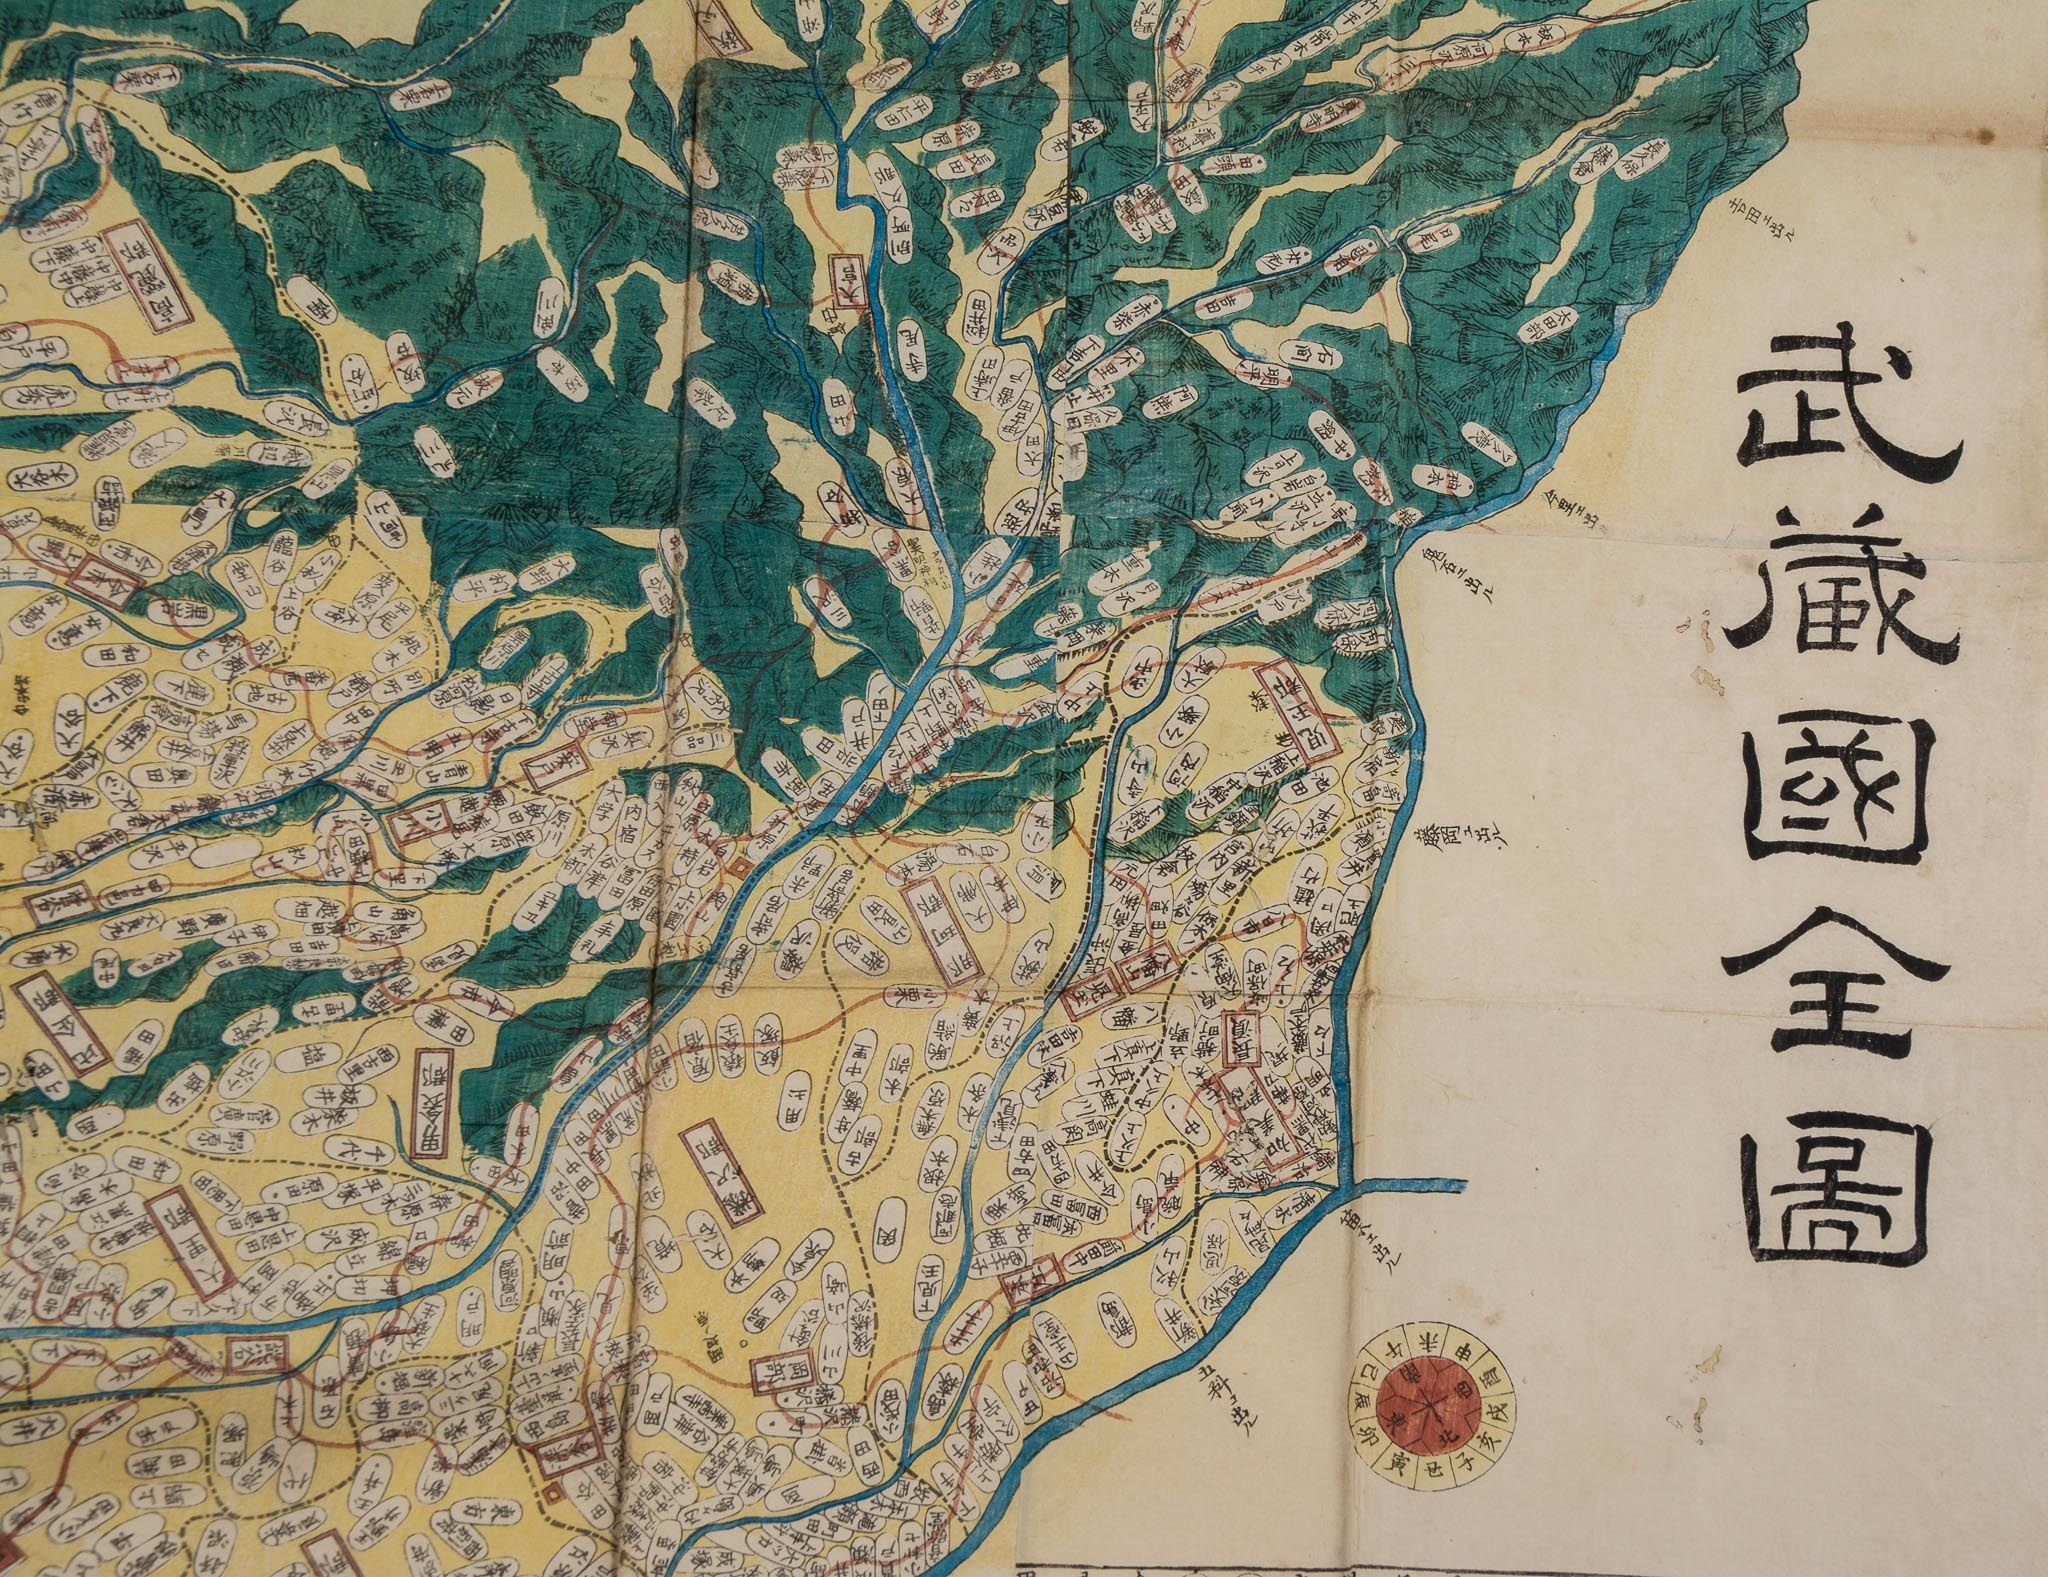 Ino (Tadataka) - A large map of Musashi province, showing Edo, or Tokyo, with extensive text - Image 2 of 6